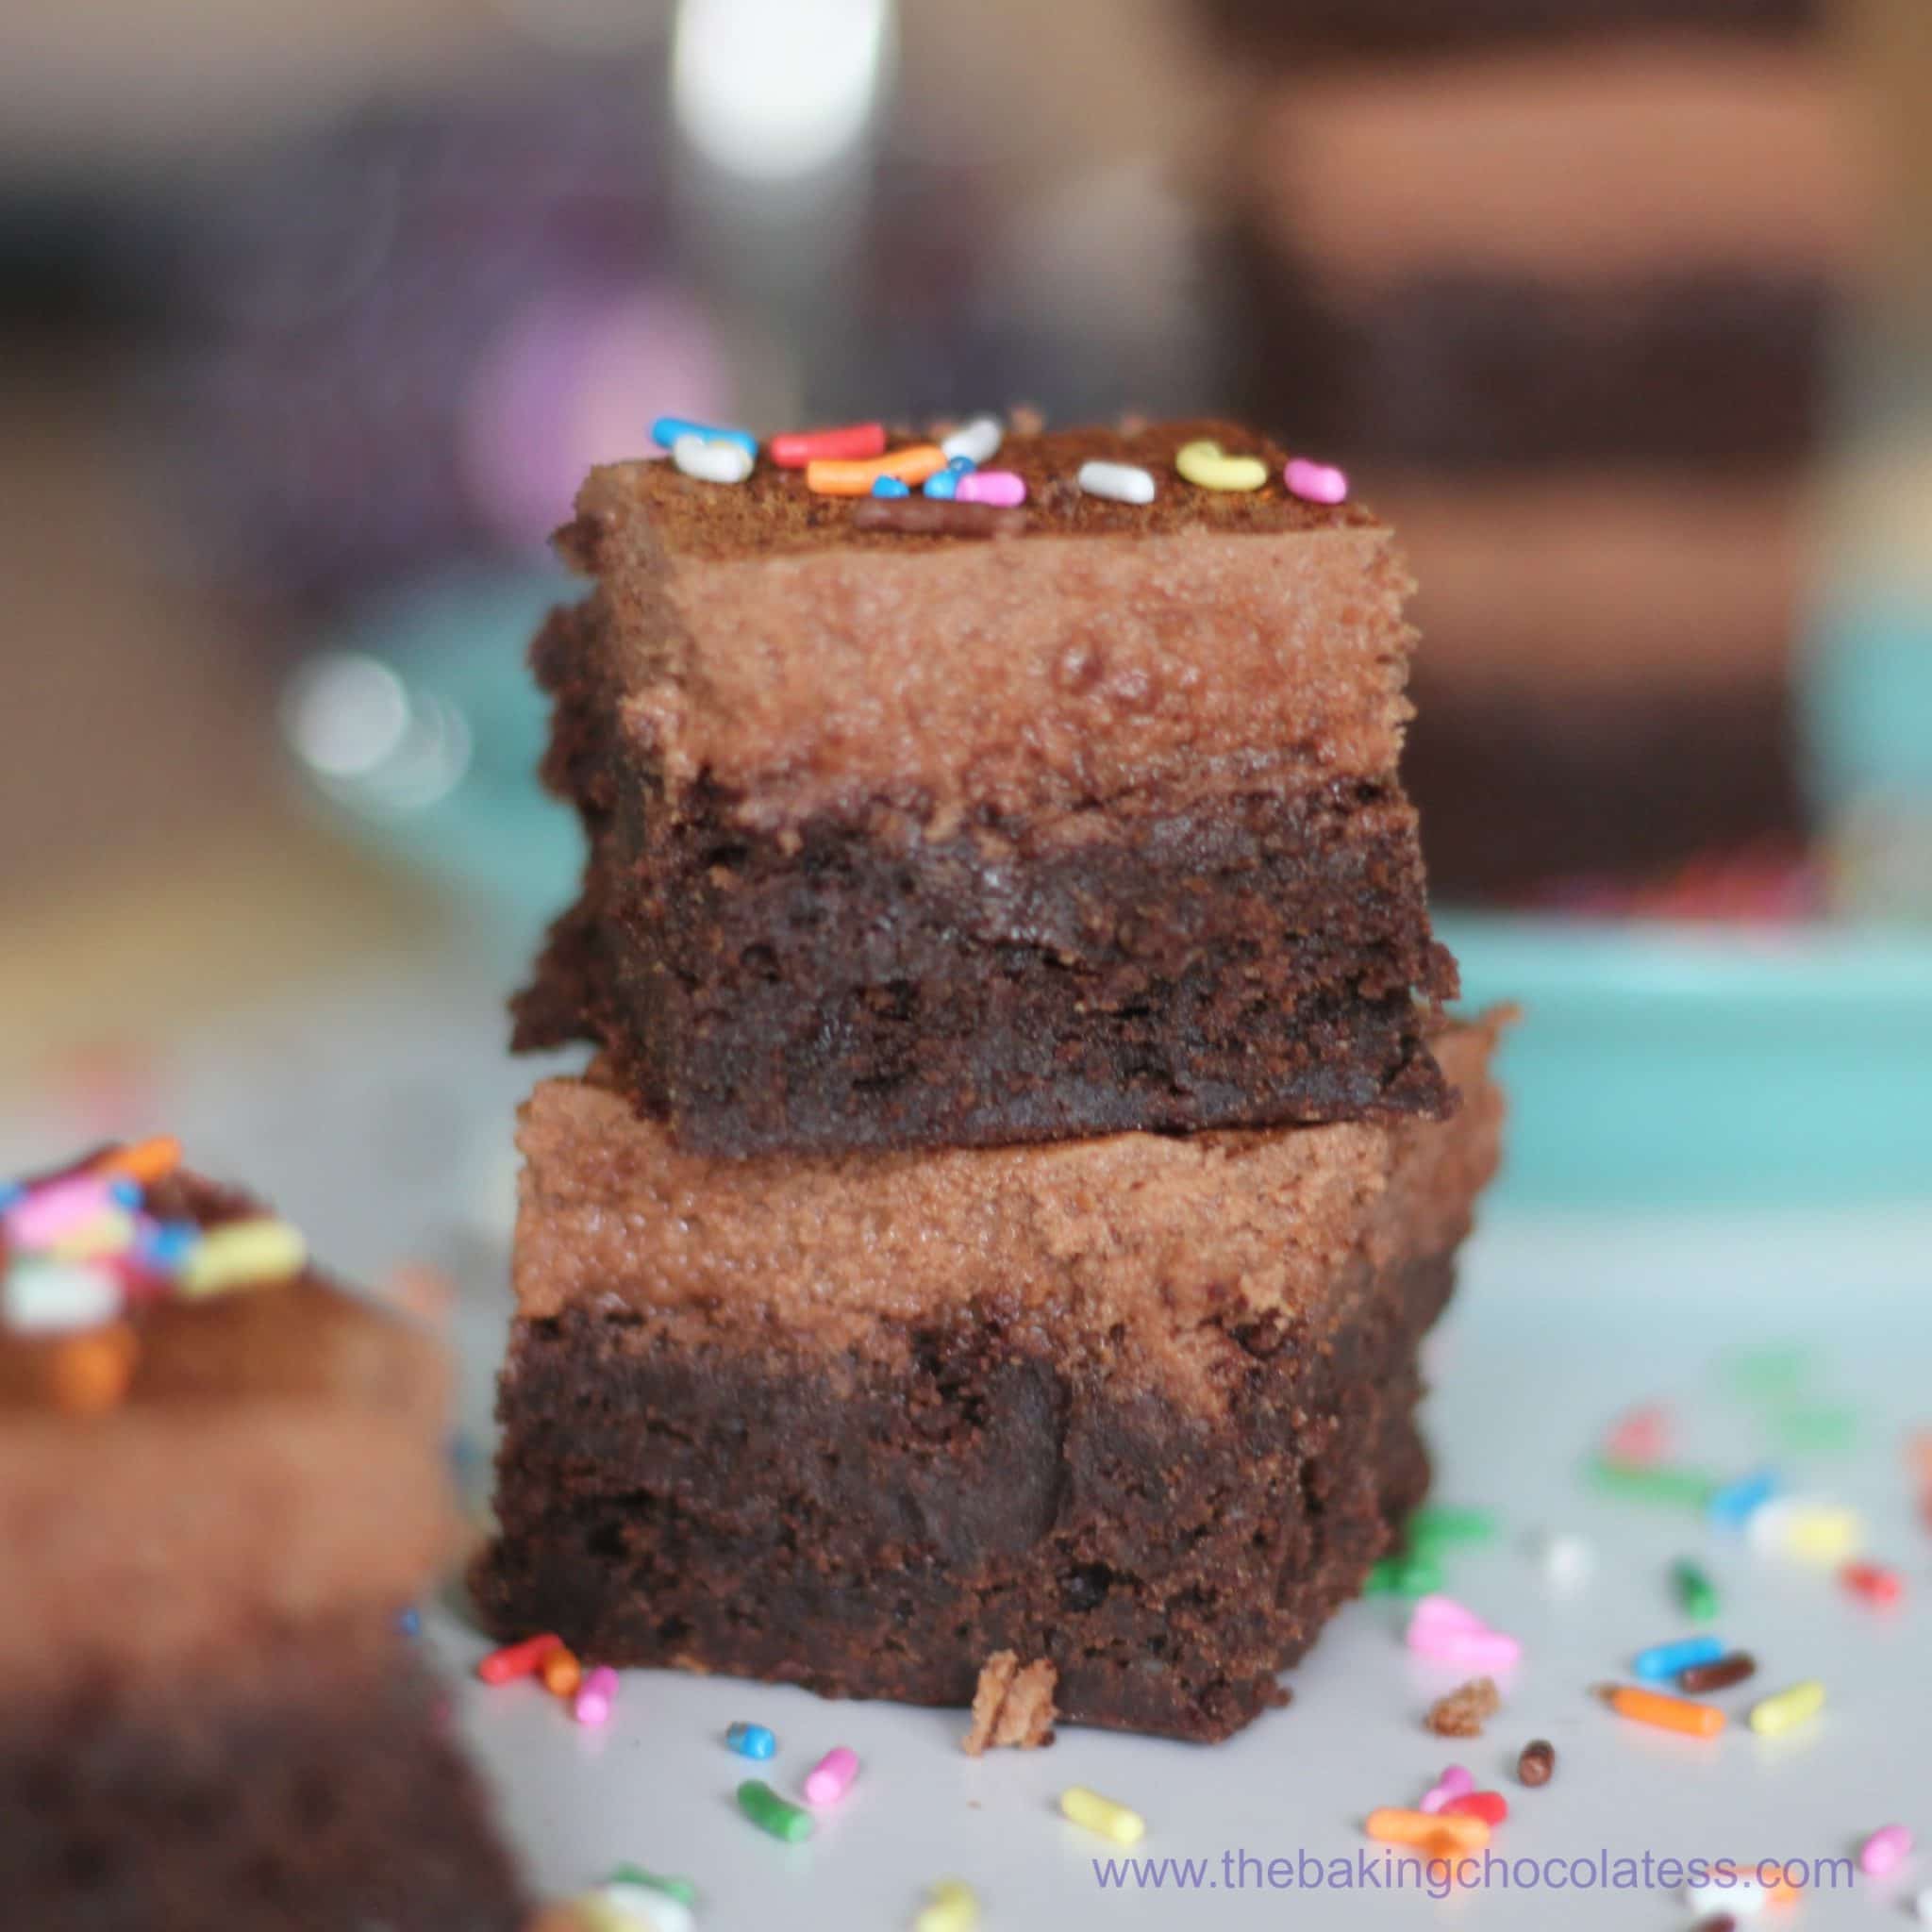 Mexican Spiced Brownies